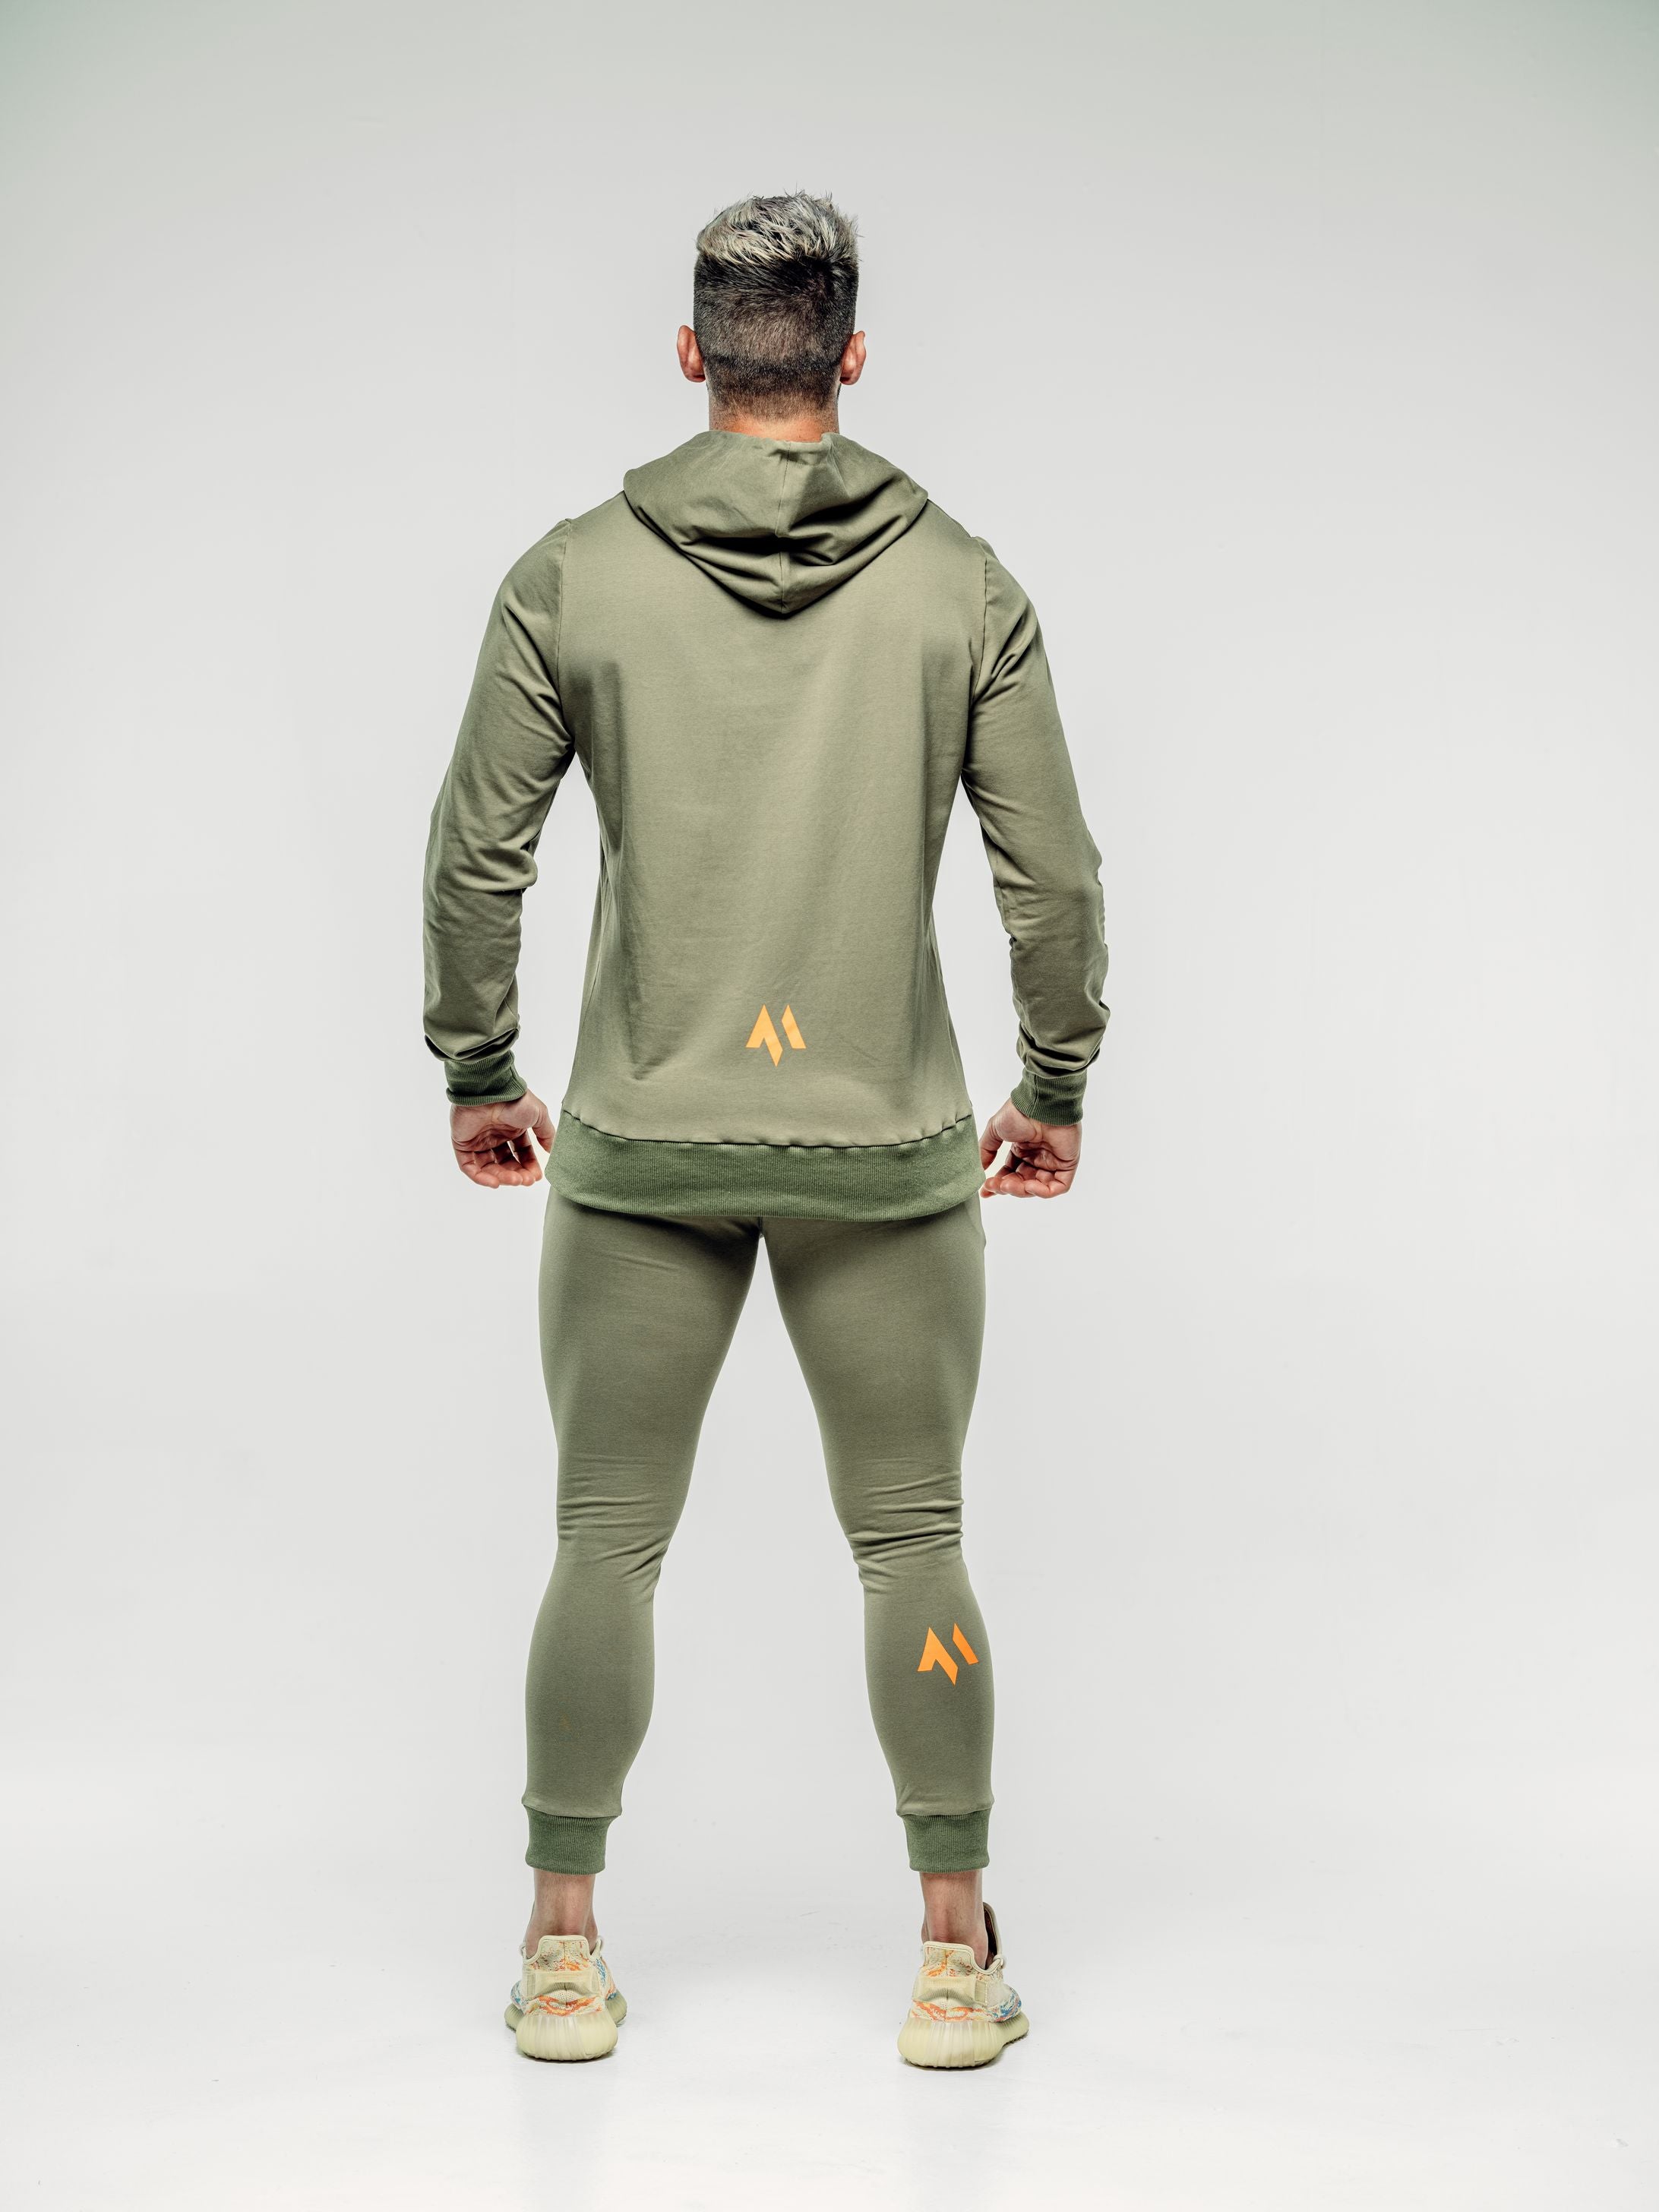 This is a rear view full body shot of Shane wearing the new standard hoodie in khaki.  It shows the M emblem in signature orange in the lower middle of the back as well as on the back of Shane's calf.